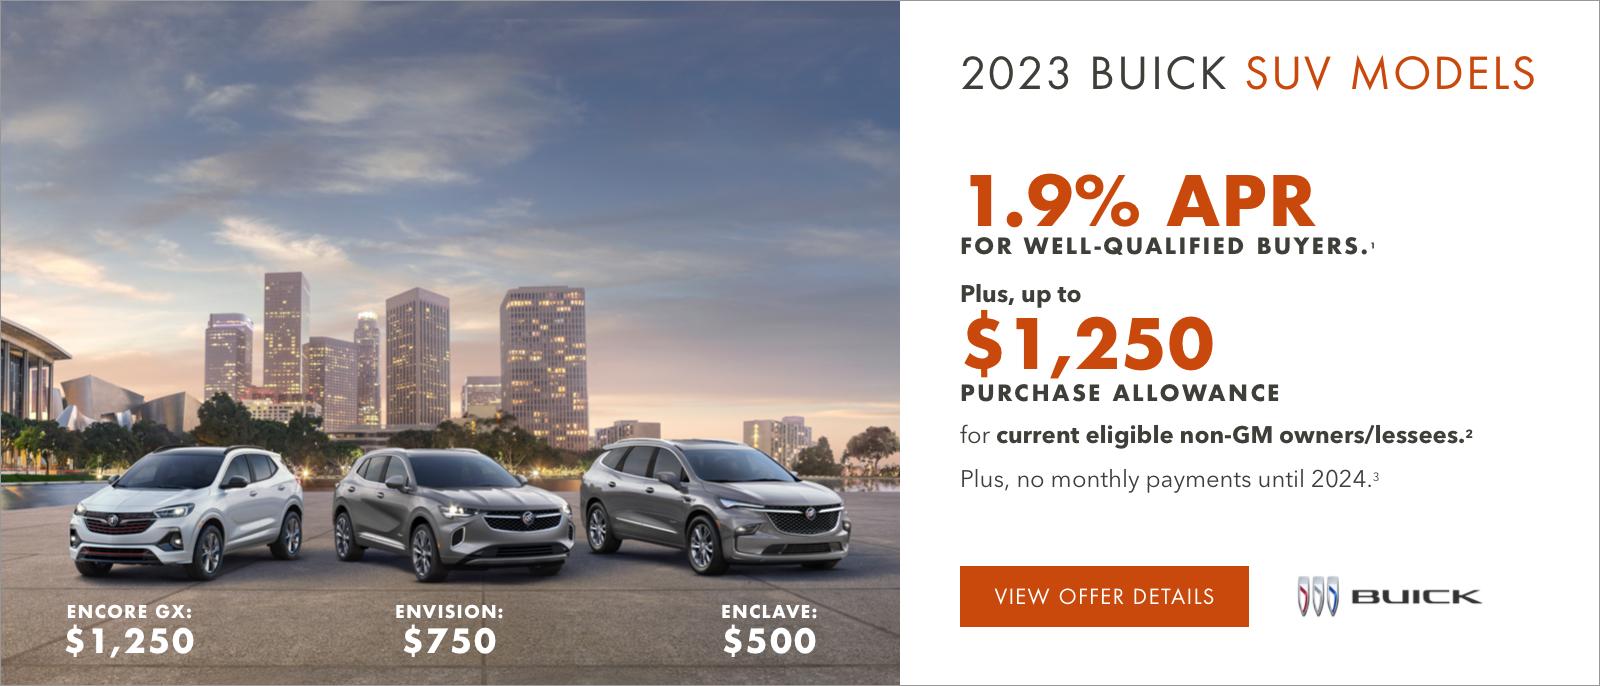 1.9% APR FOR WELL-QUALIFIED BUYERS.1

Plus, up to $1,250 PURCHASE ALLOWANCE for current eligible non-GM owners/lessees.2

PLUS, NO MONTHLY PAYMENTS UNTIL 2024.3